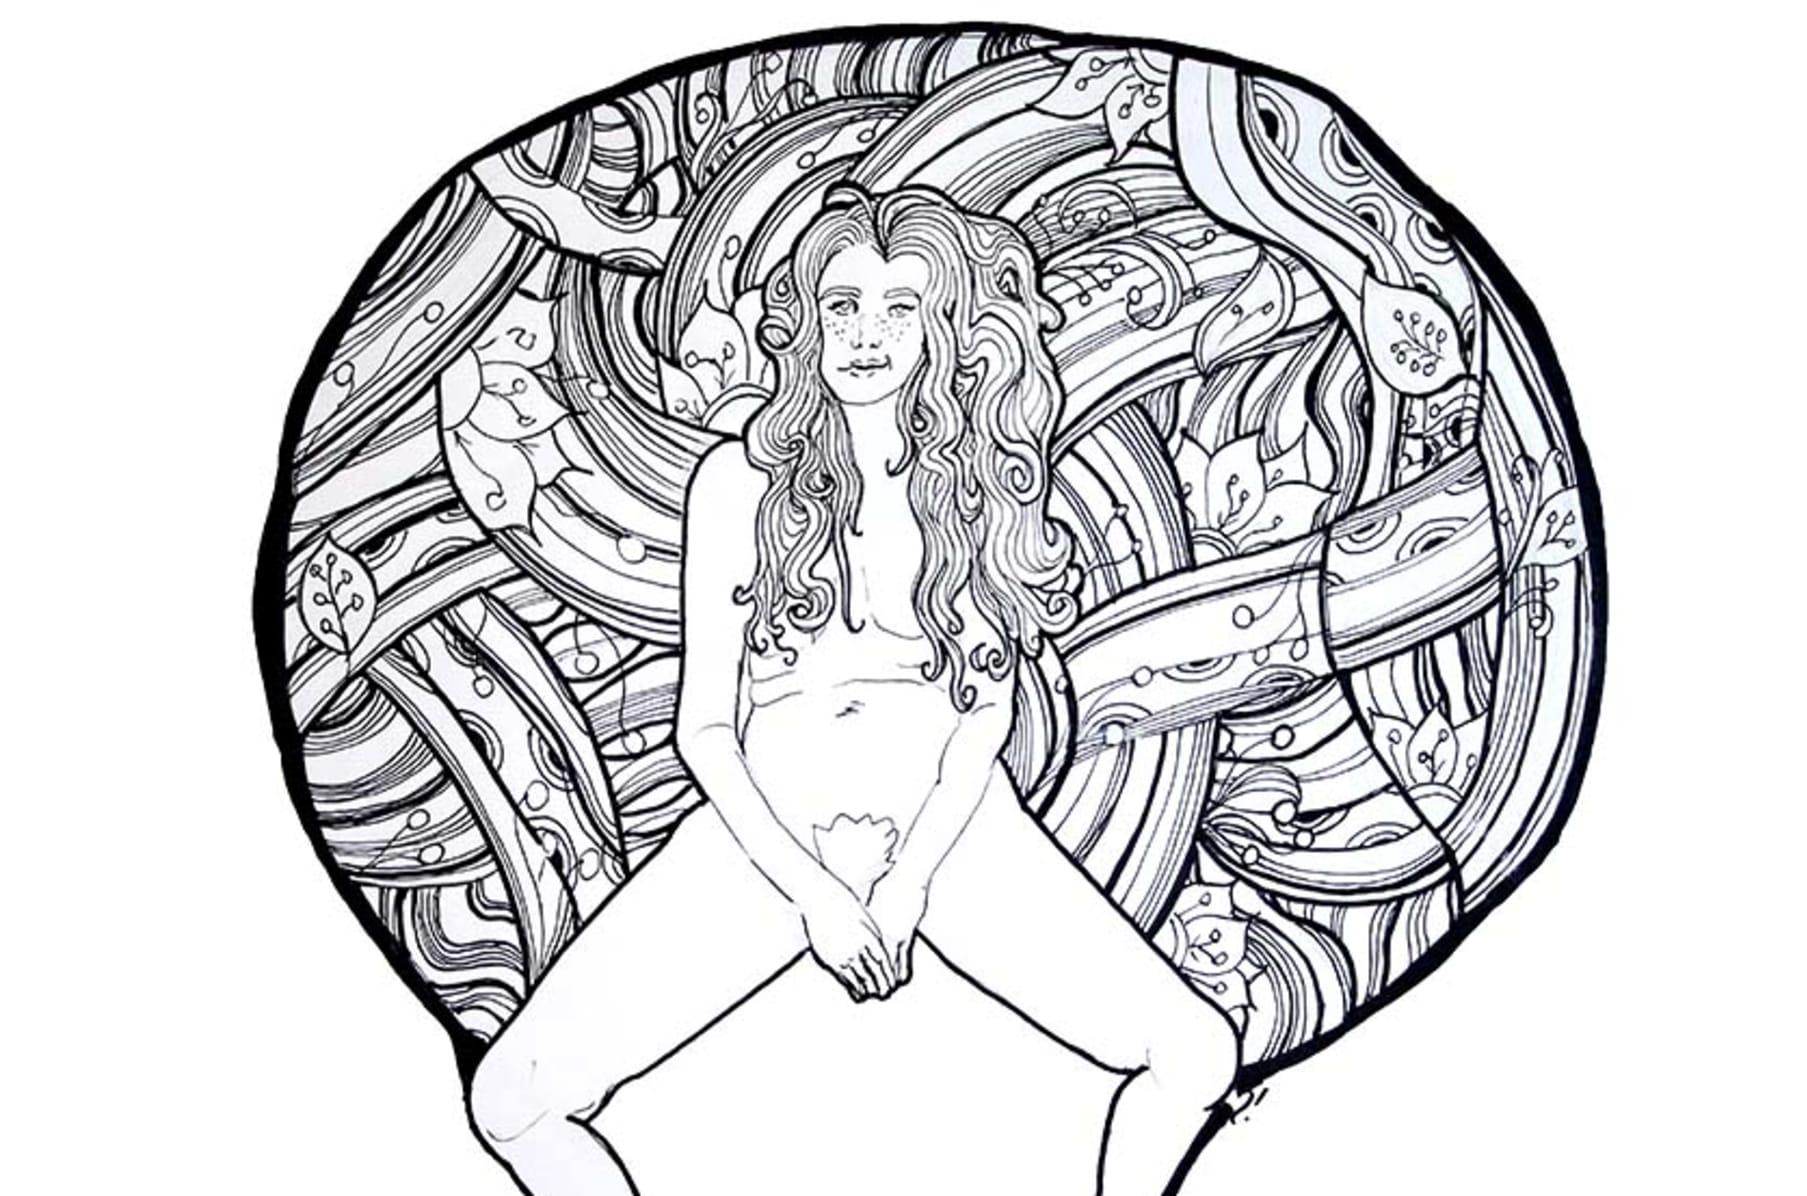 Nathalie Roussel Nue Desnudo Coloring Pages